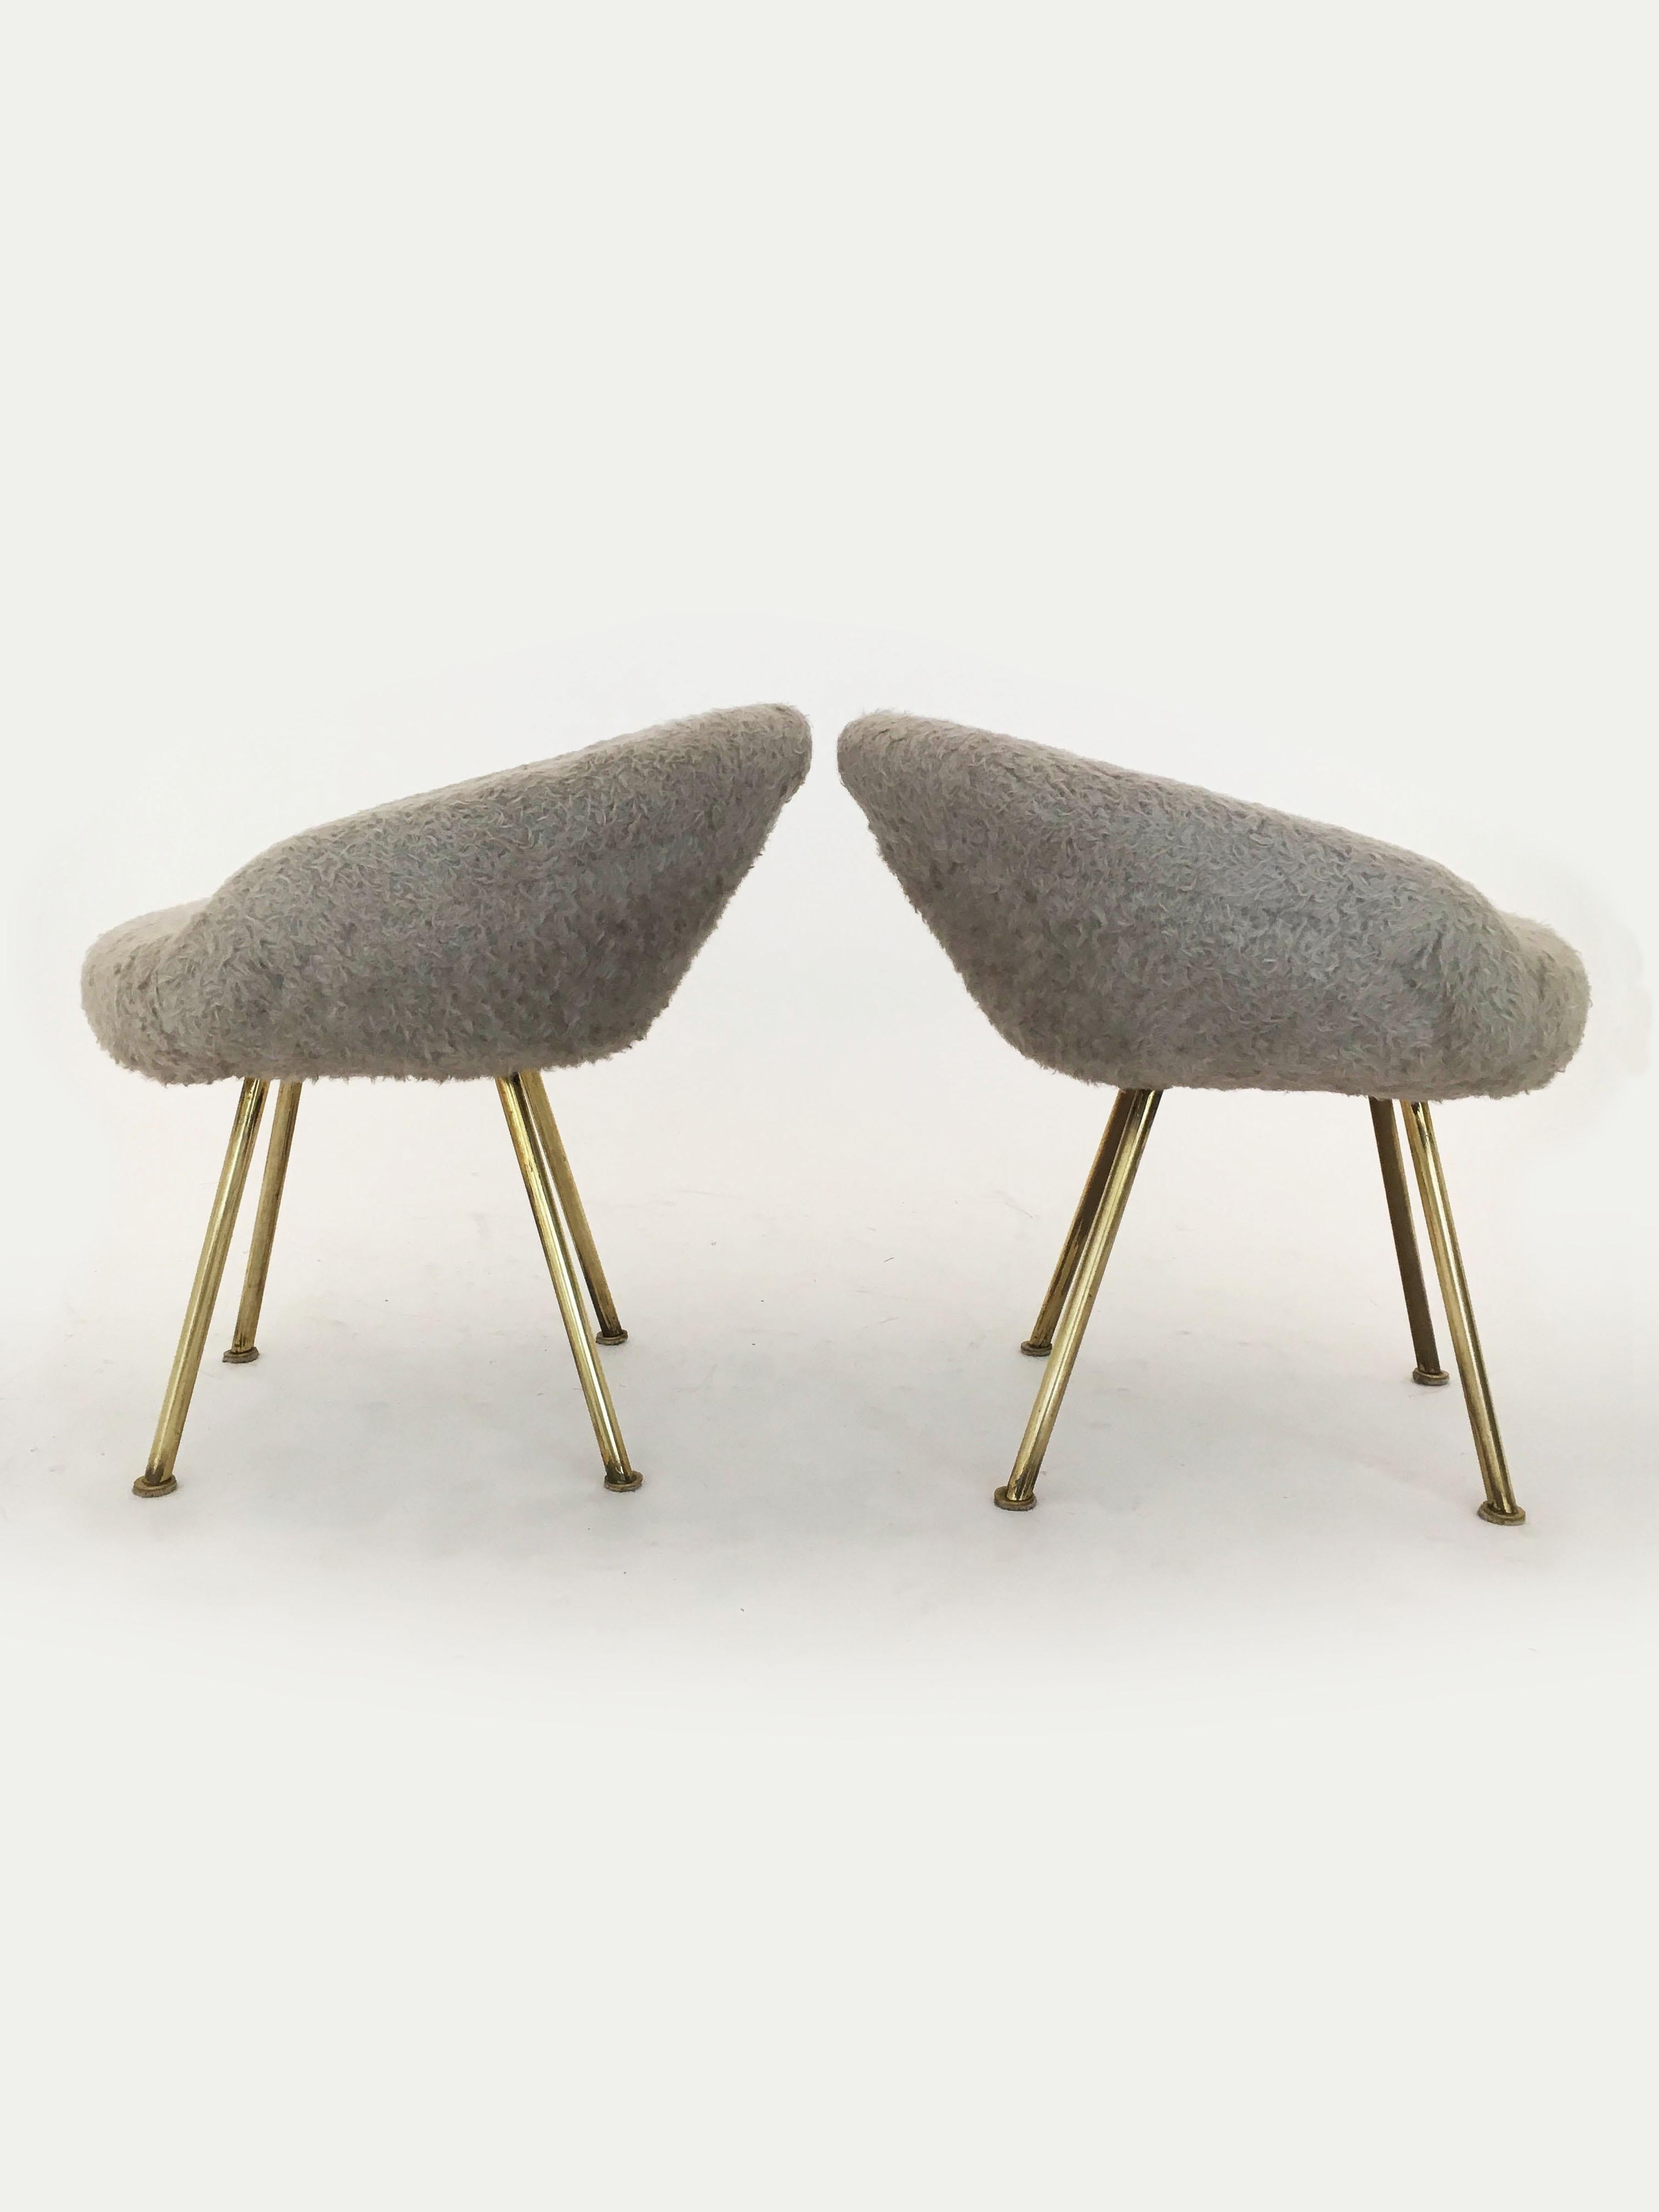 20th Century Petite Sheepskin Fur Vanity Stools after Jean Royère, France 1950s